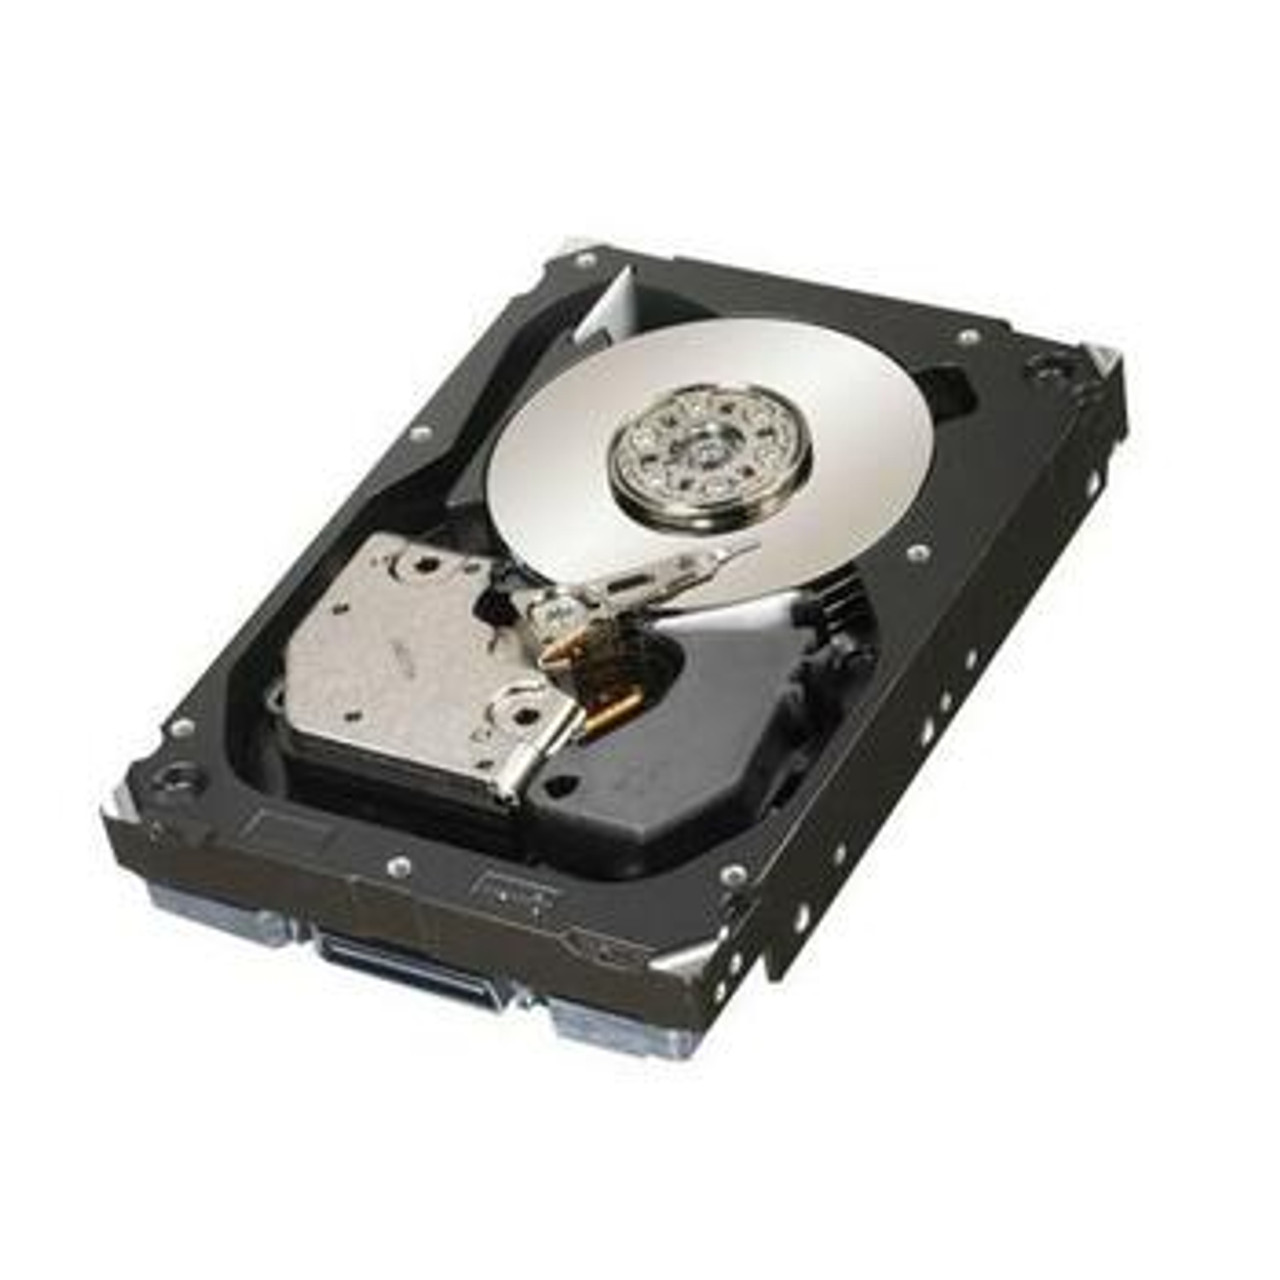 0N8750 Dell 146GB 10000RPM Fibre Channel 2 Gbps 3.5 8MB Cache Hard Drive